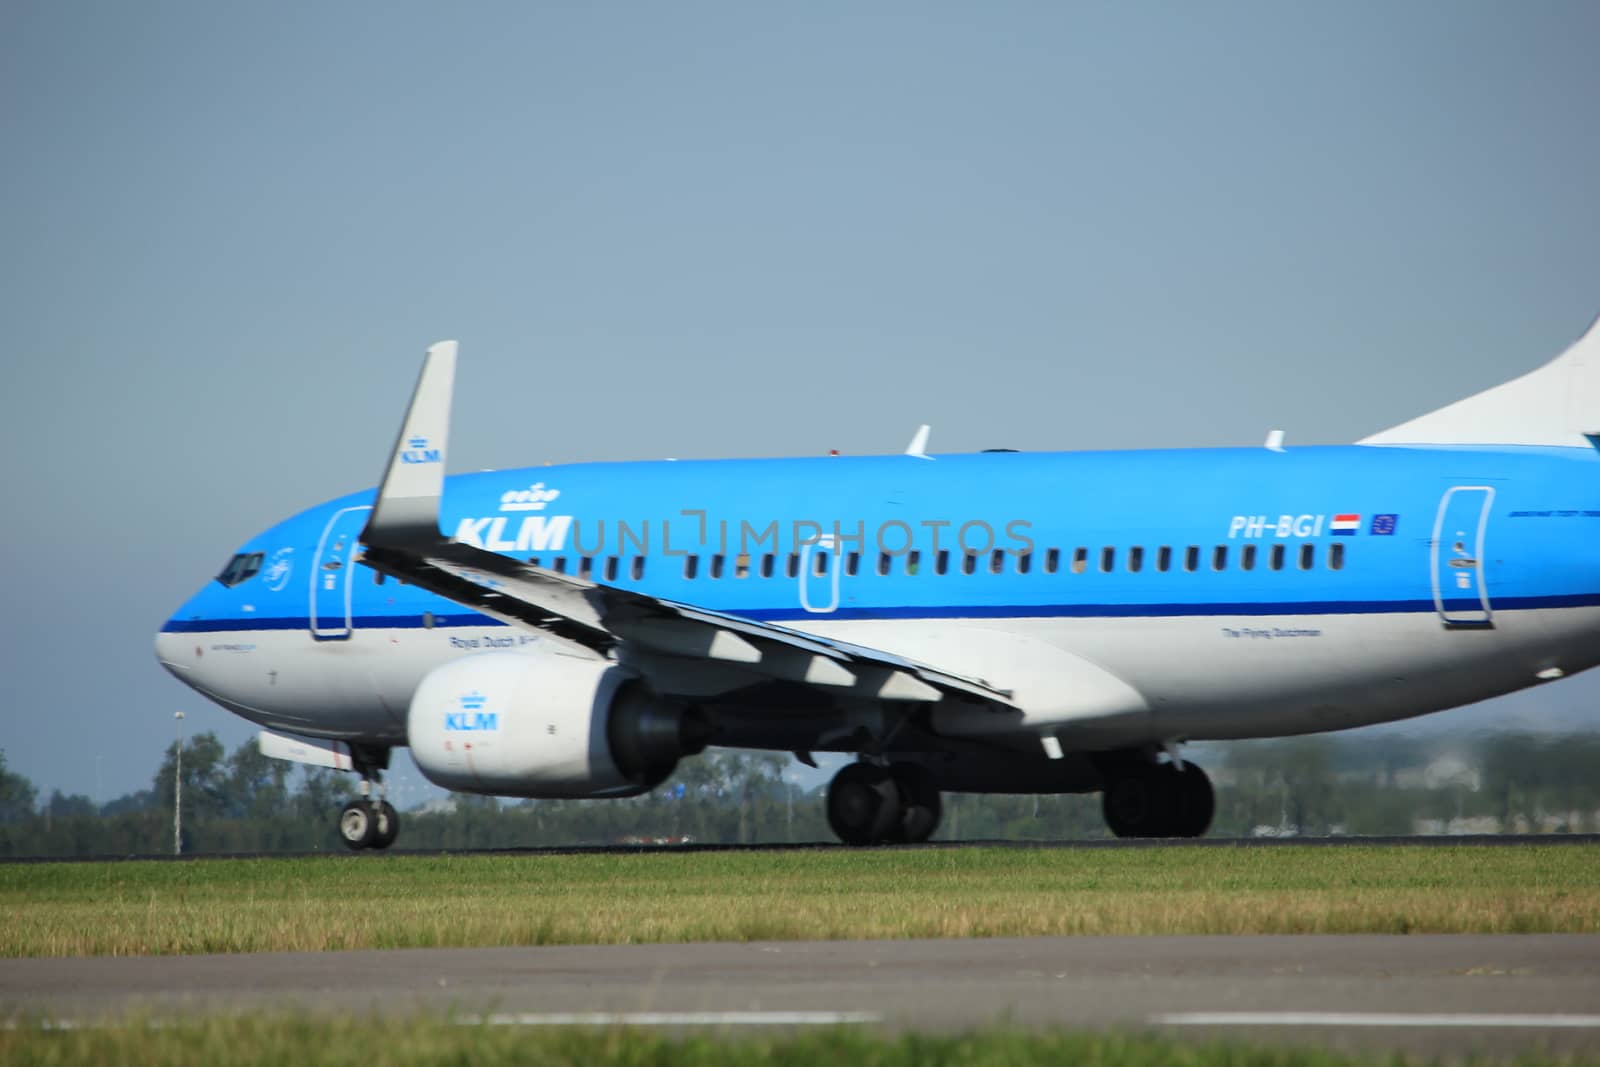 Amsterdam, the Netherlands  - August, 18th 2016: PH-BGI KLM Royal Dutch Airlines Boeing 737,
taking off from Polderbaan Runway Amsterdam Airport Schiphol